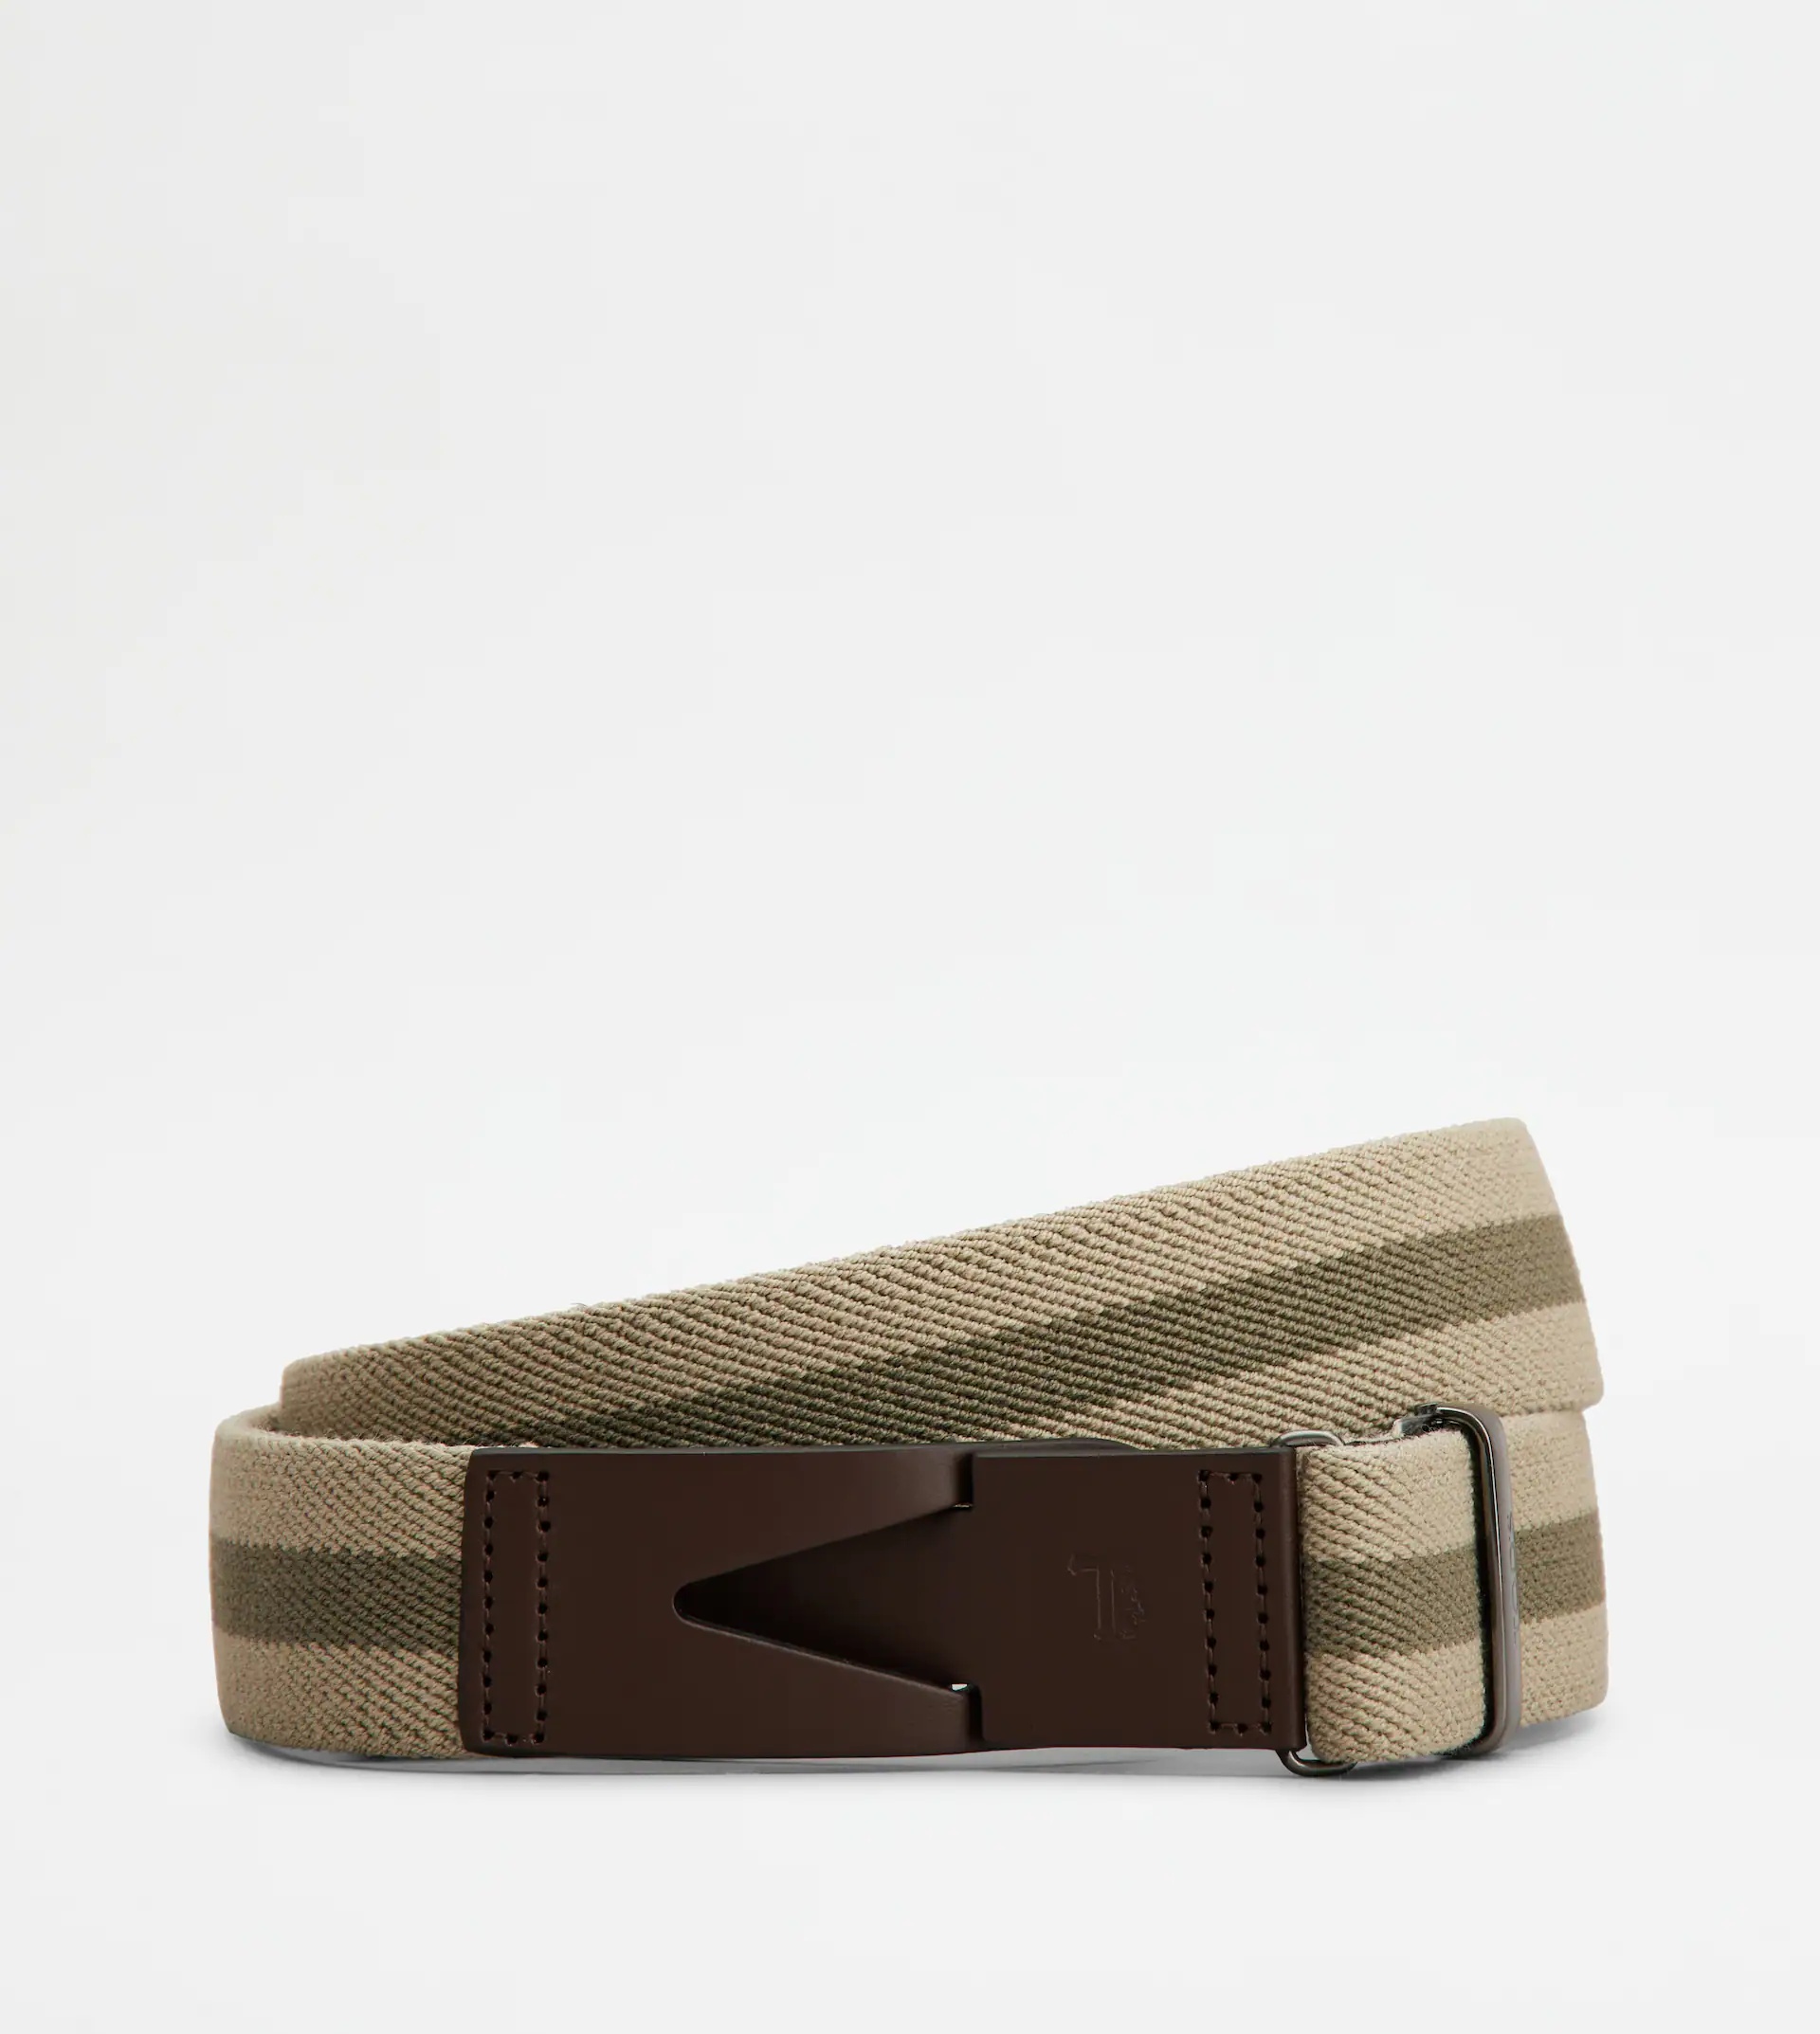 BELT IN CANVAS AND LEATHER - BEIGE, GREEN, BROWN - 1